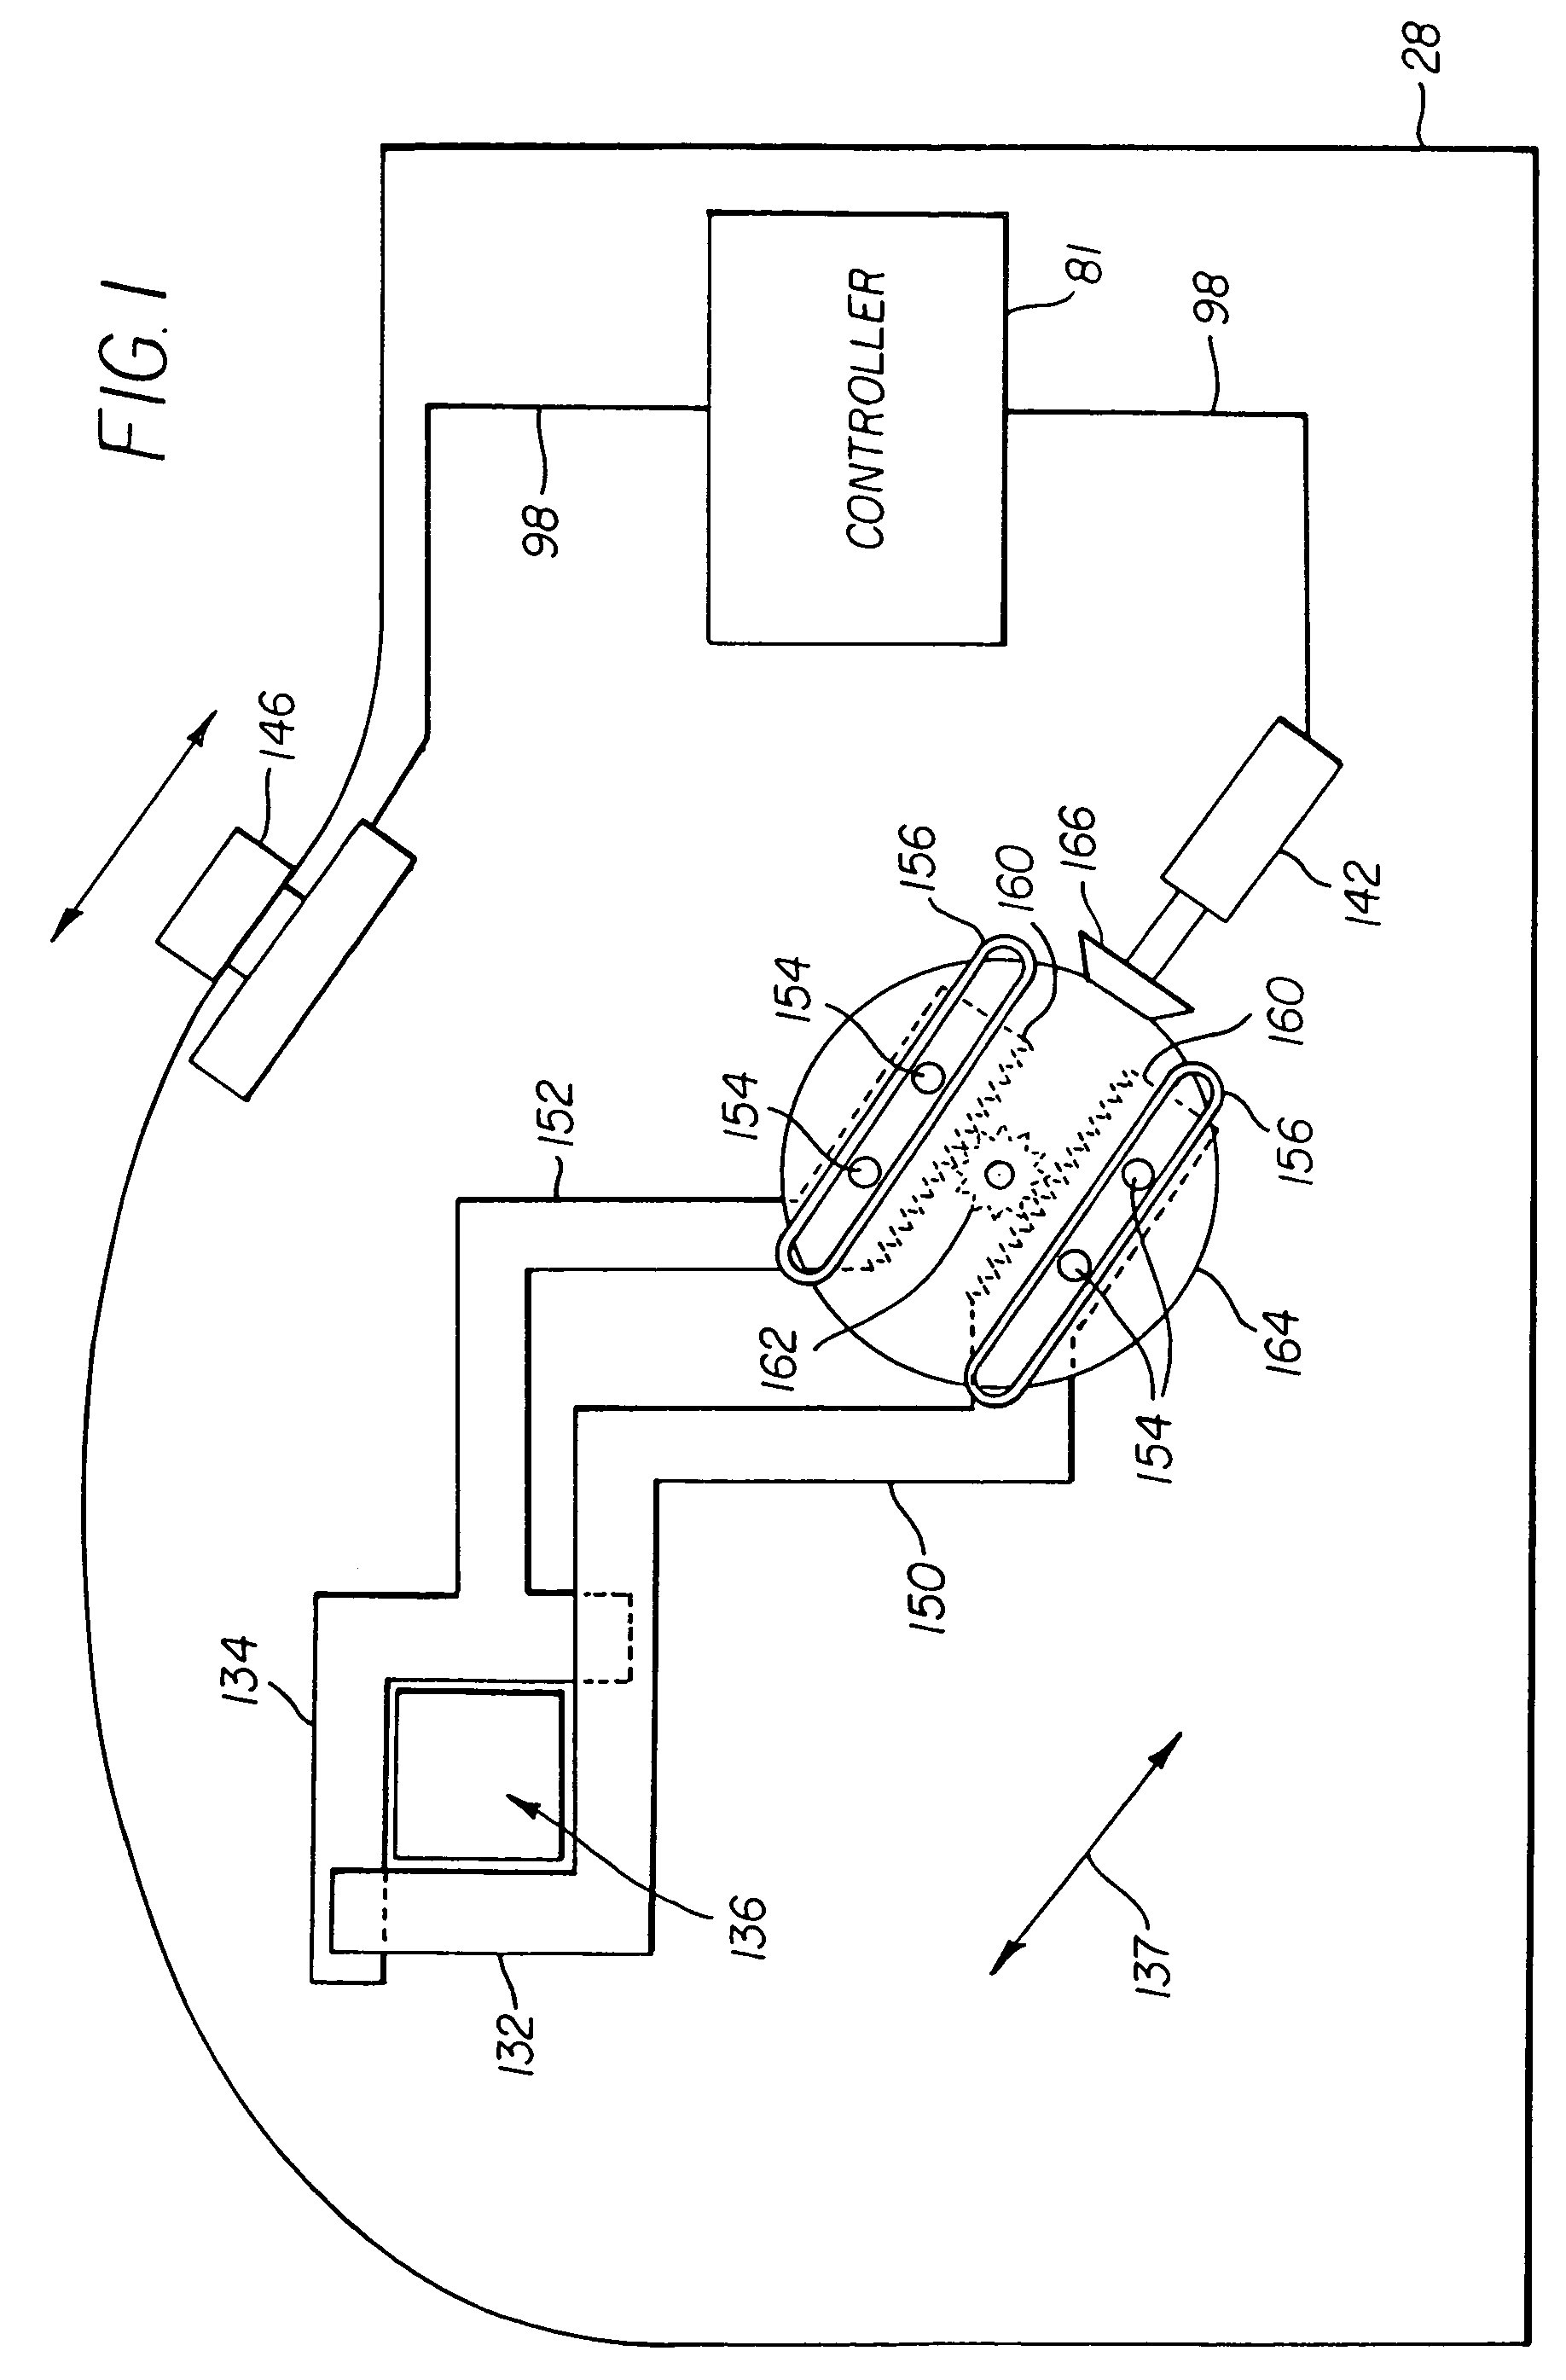 User interface for controlling cropping in electronic camera